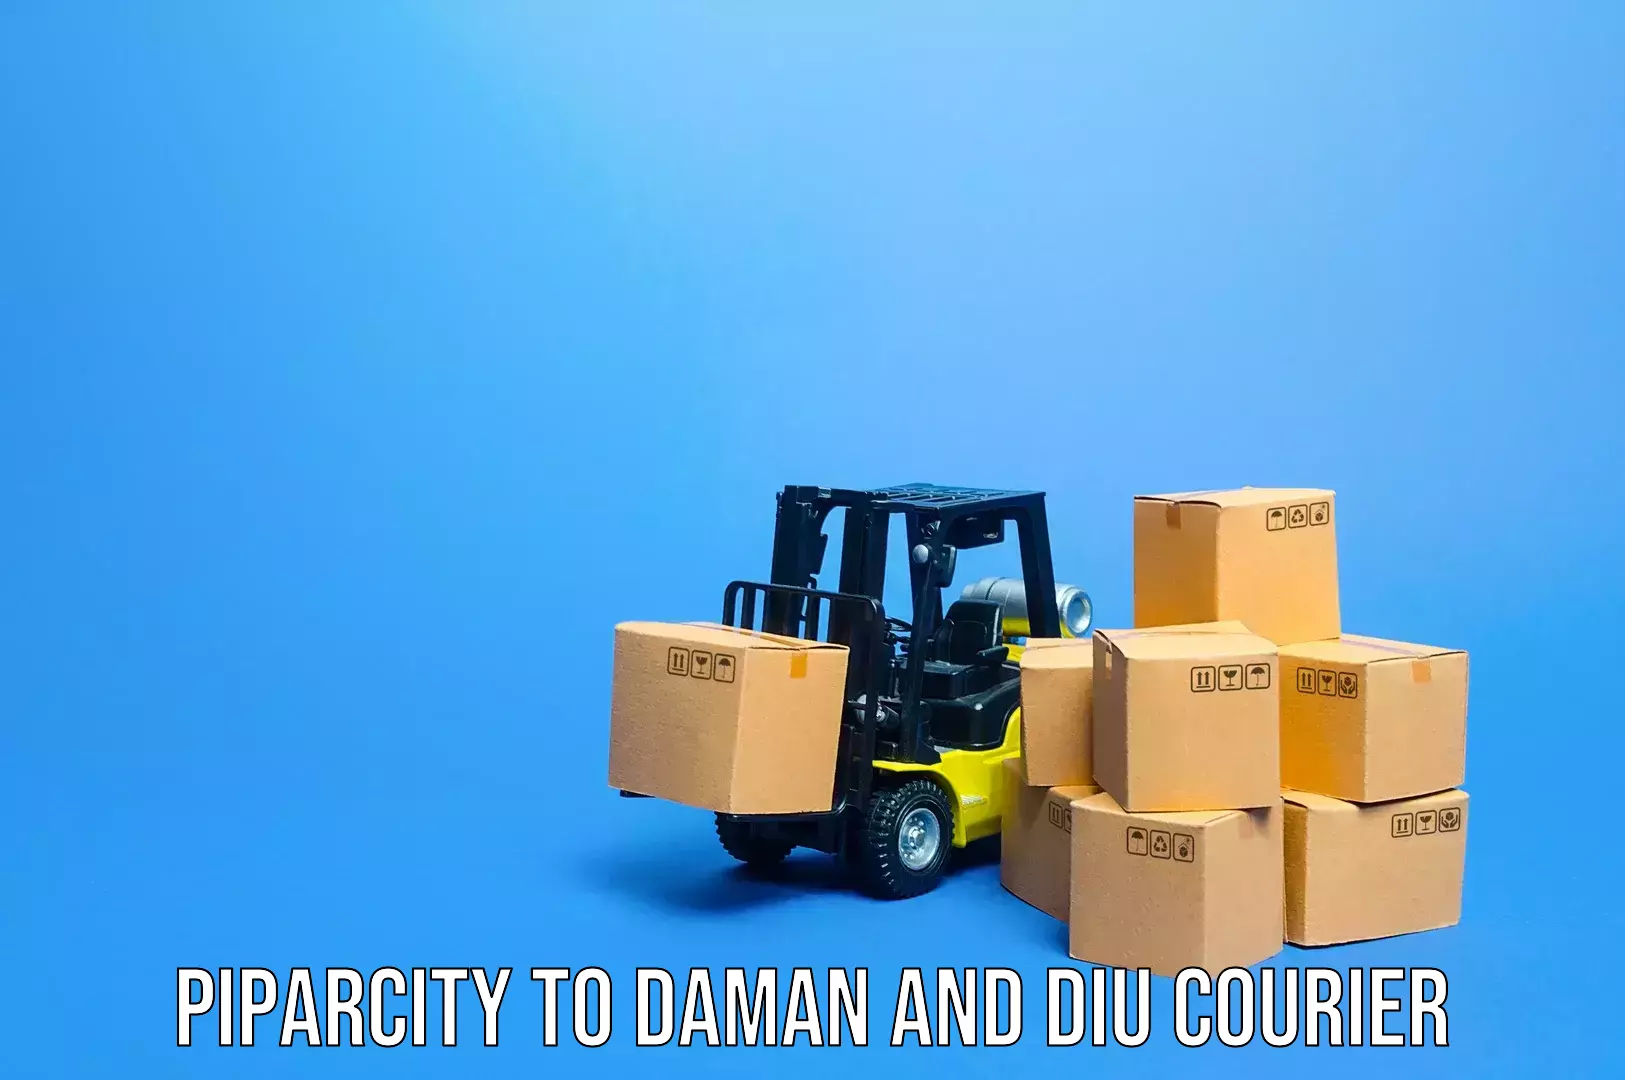 Heavy luggage shipping Piparcity to Diu